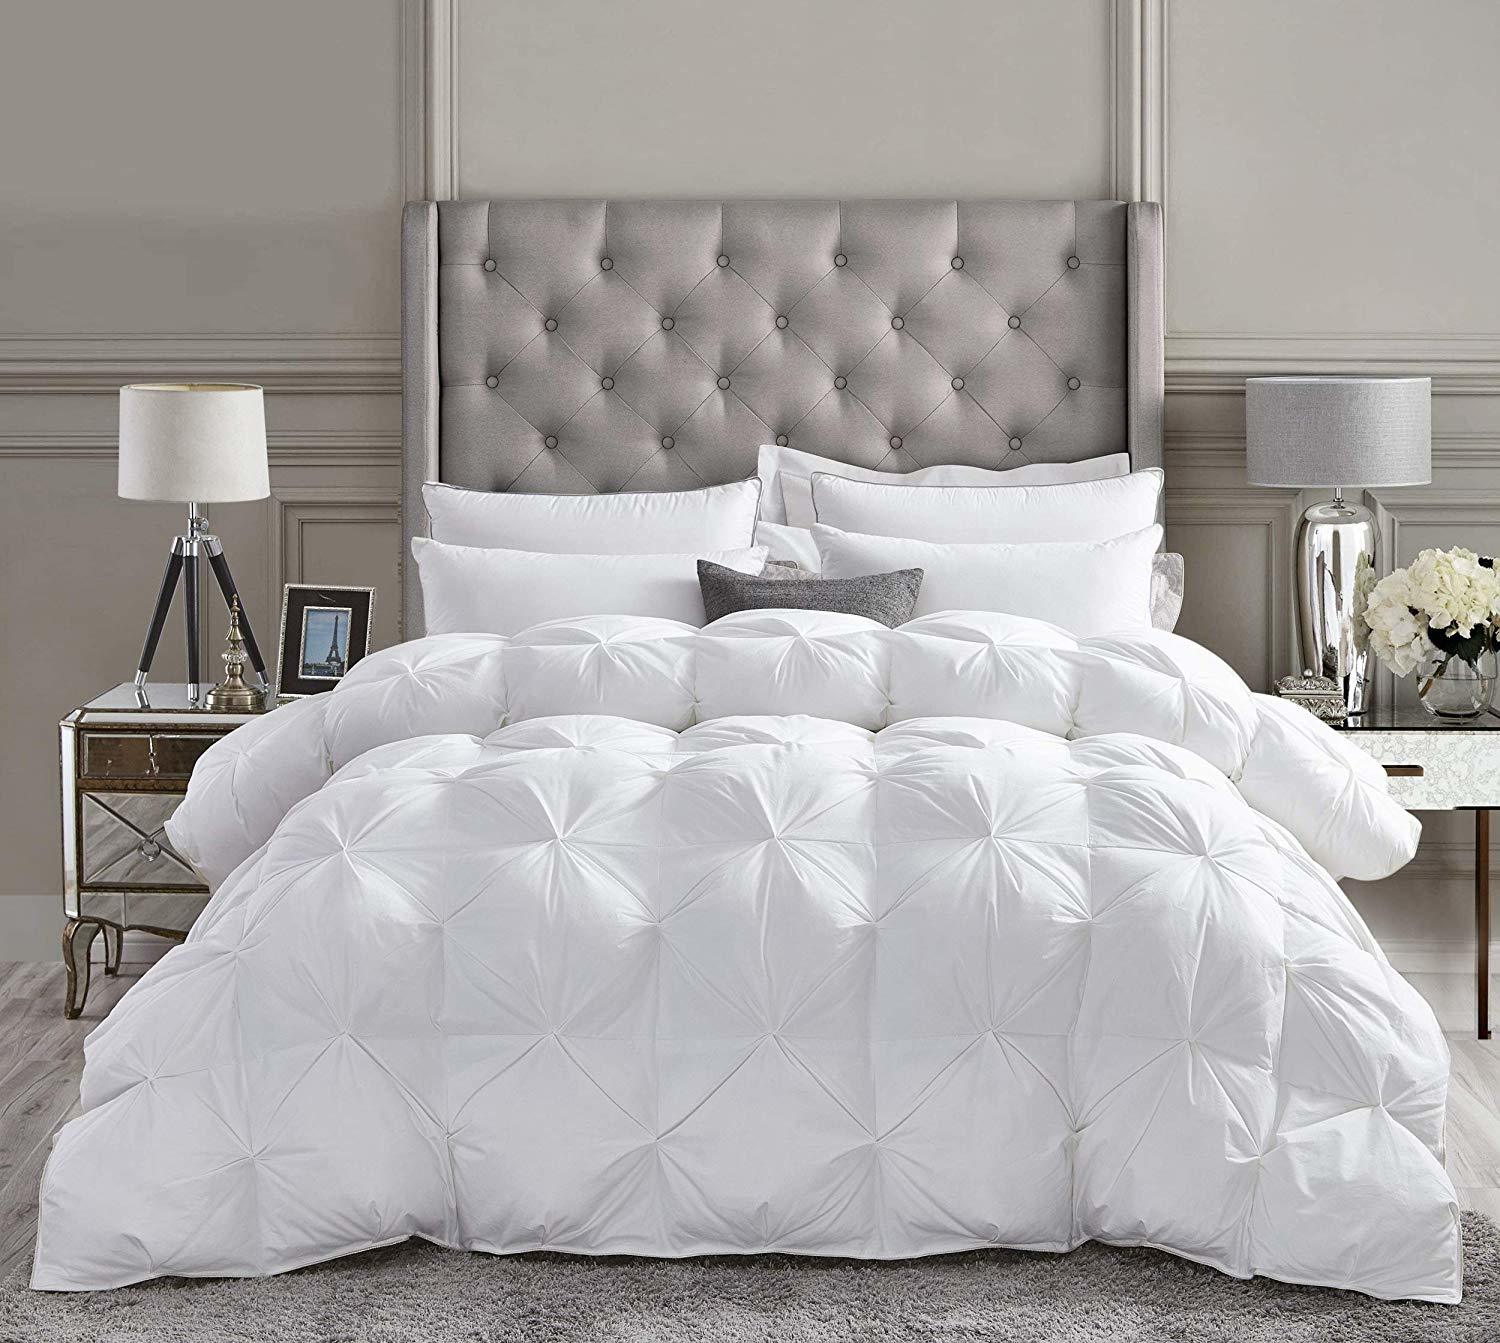 Best King Size Down Comforters In 2020 Review Of The Top 7 Picks